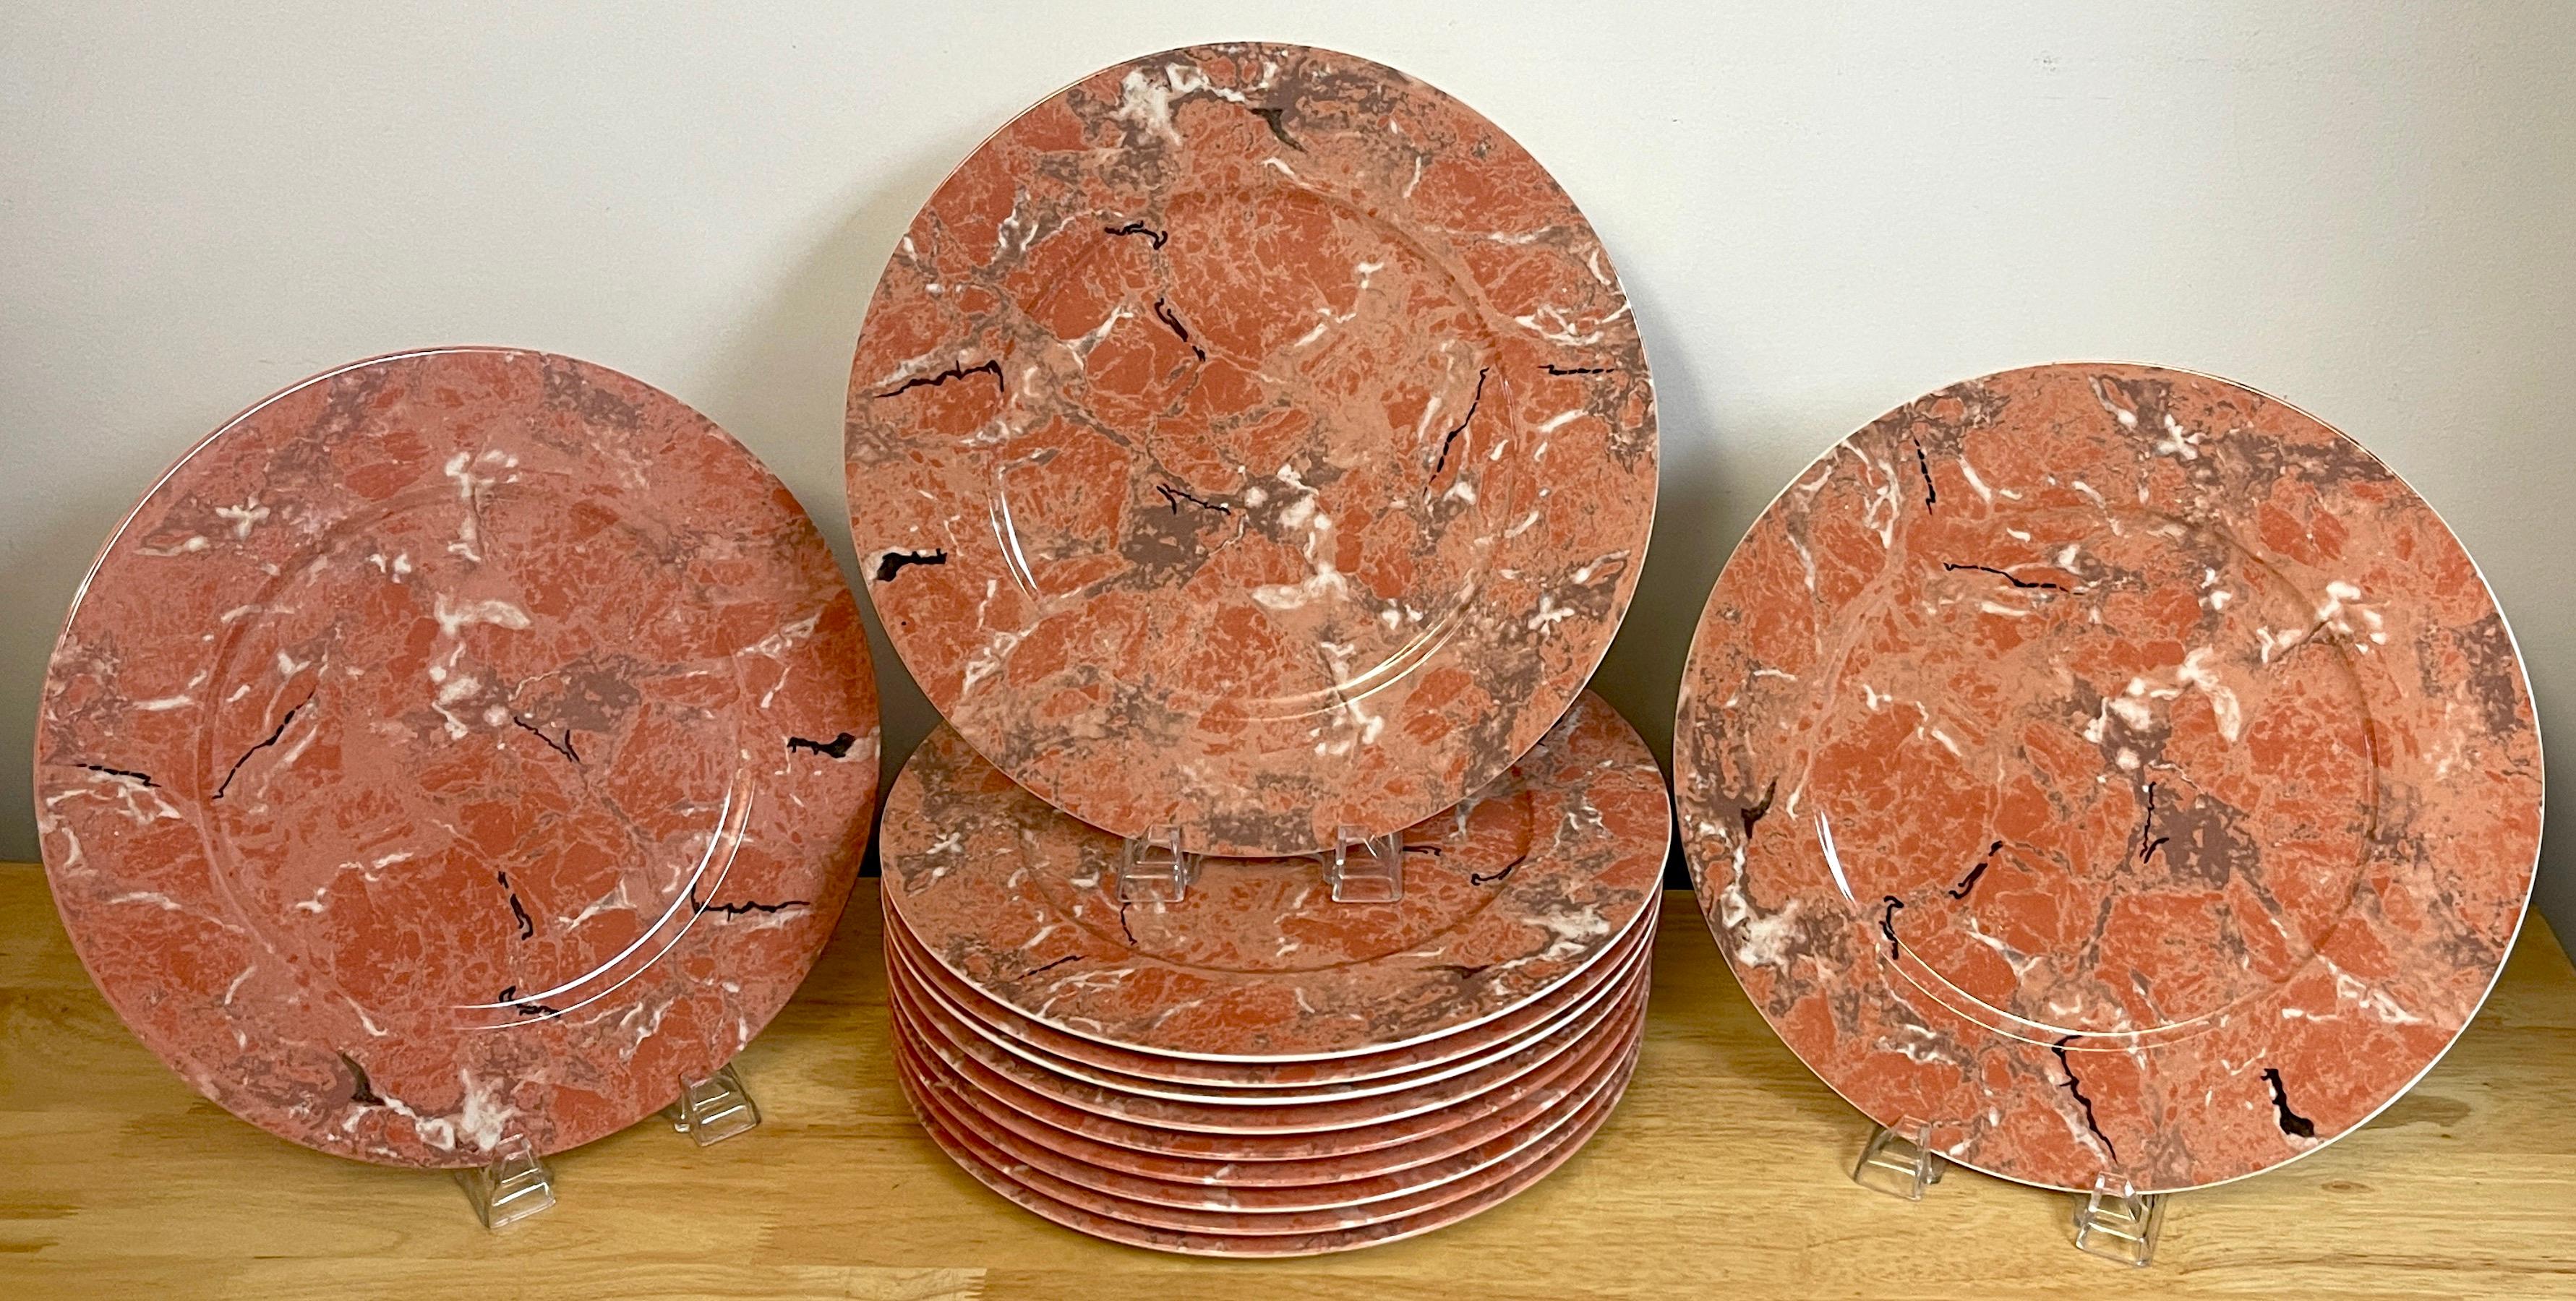 12 coral colored marble service plates by Villeroy & Boch, each one realistically decorated to look like marble. Marked Villeroy & Boch 'Luxembourg'.